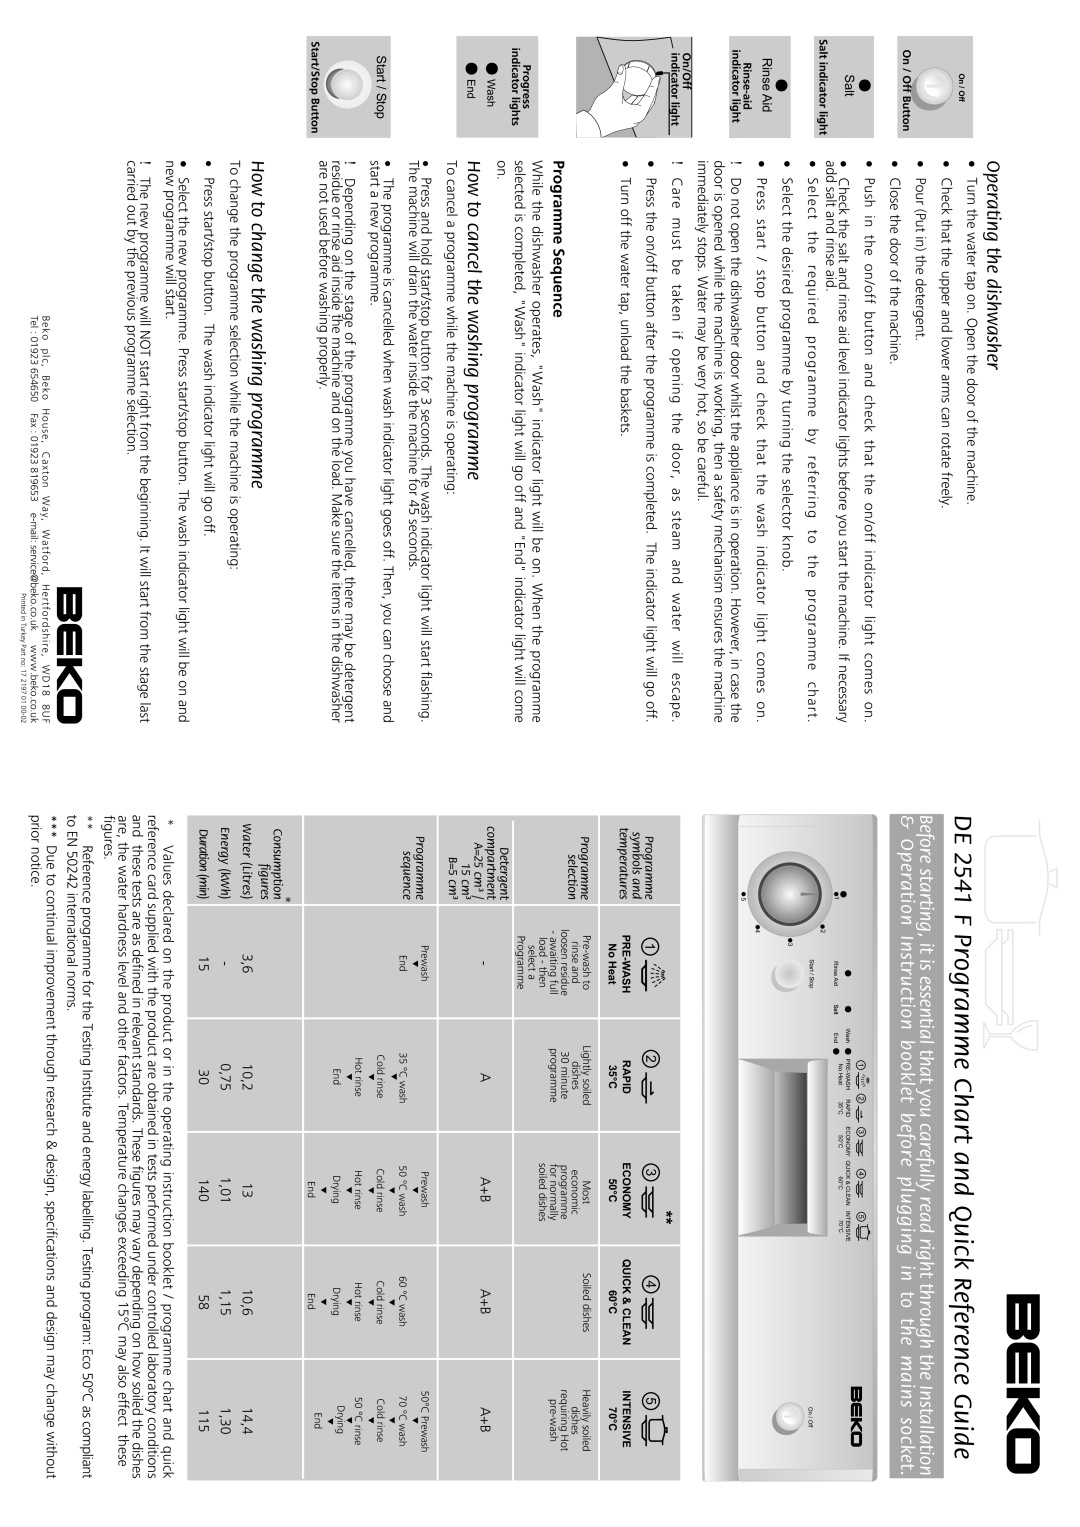 Beko specifications DE 2541 F Programme Chart and Quick Reference Guide, Operating the dishwasher, Programme Sequence 